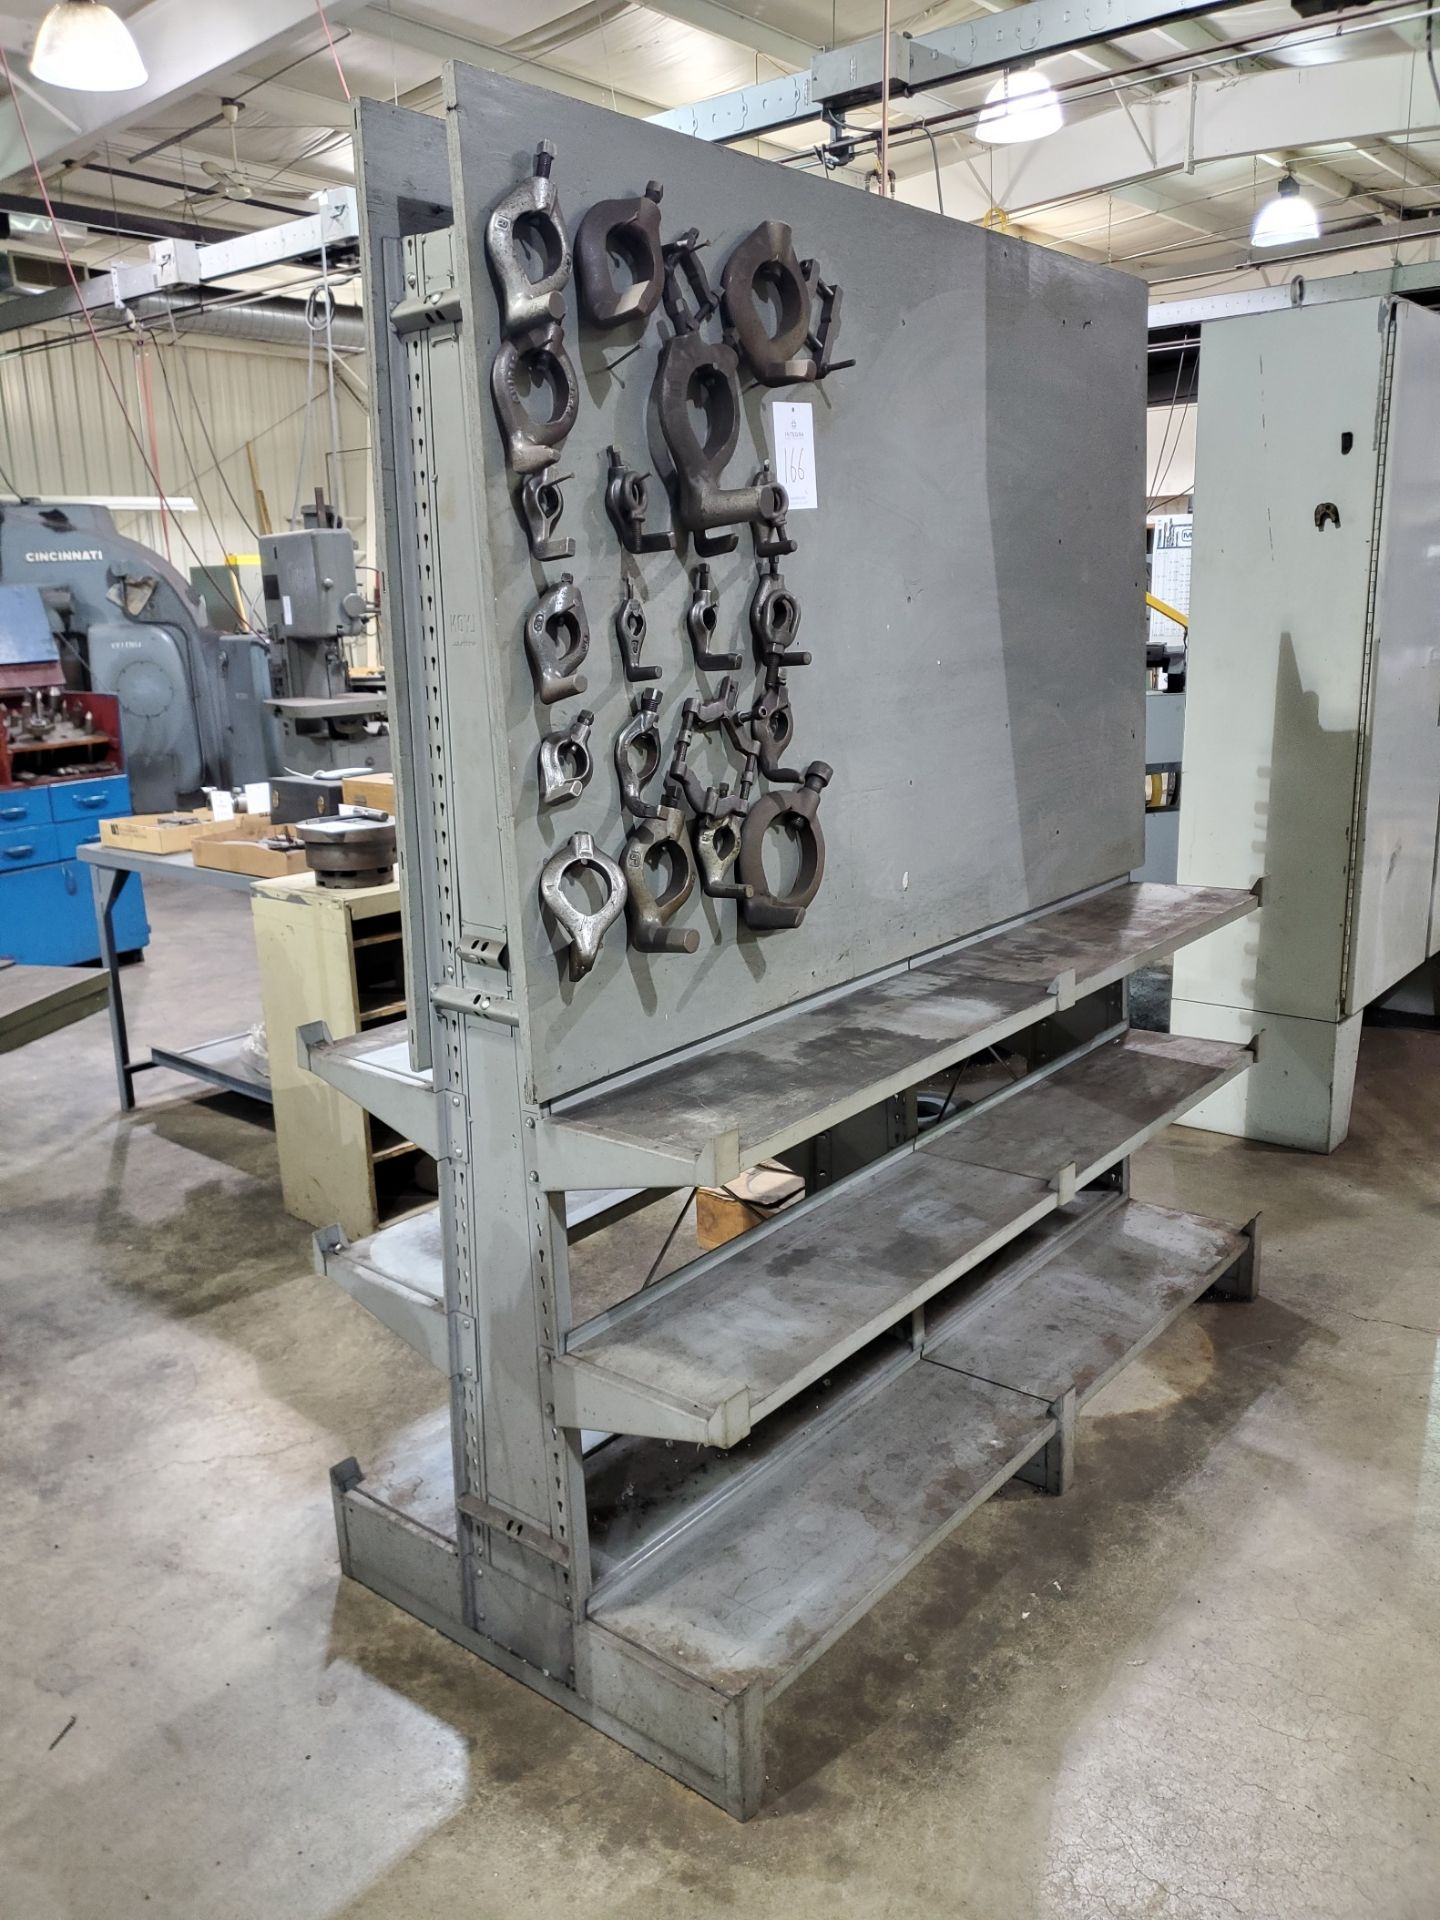 Lyon 74" x 32" x 79"H Double Sided Cantilever Rack - Image 2 of 2